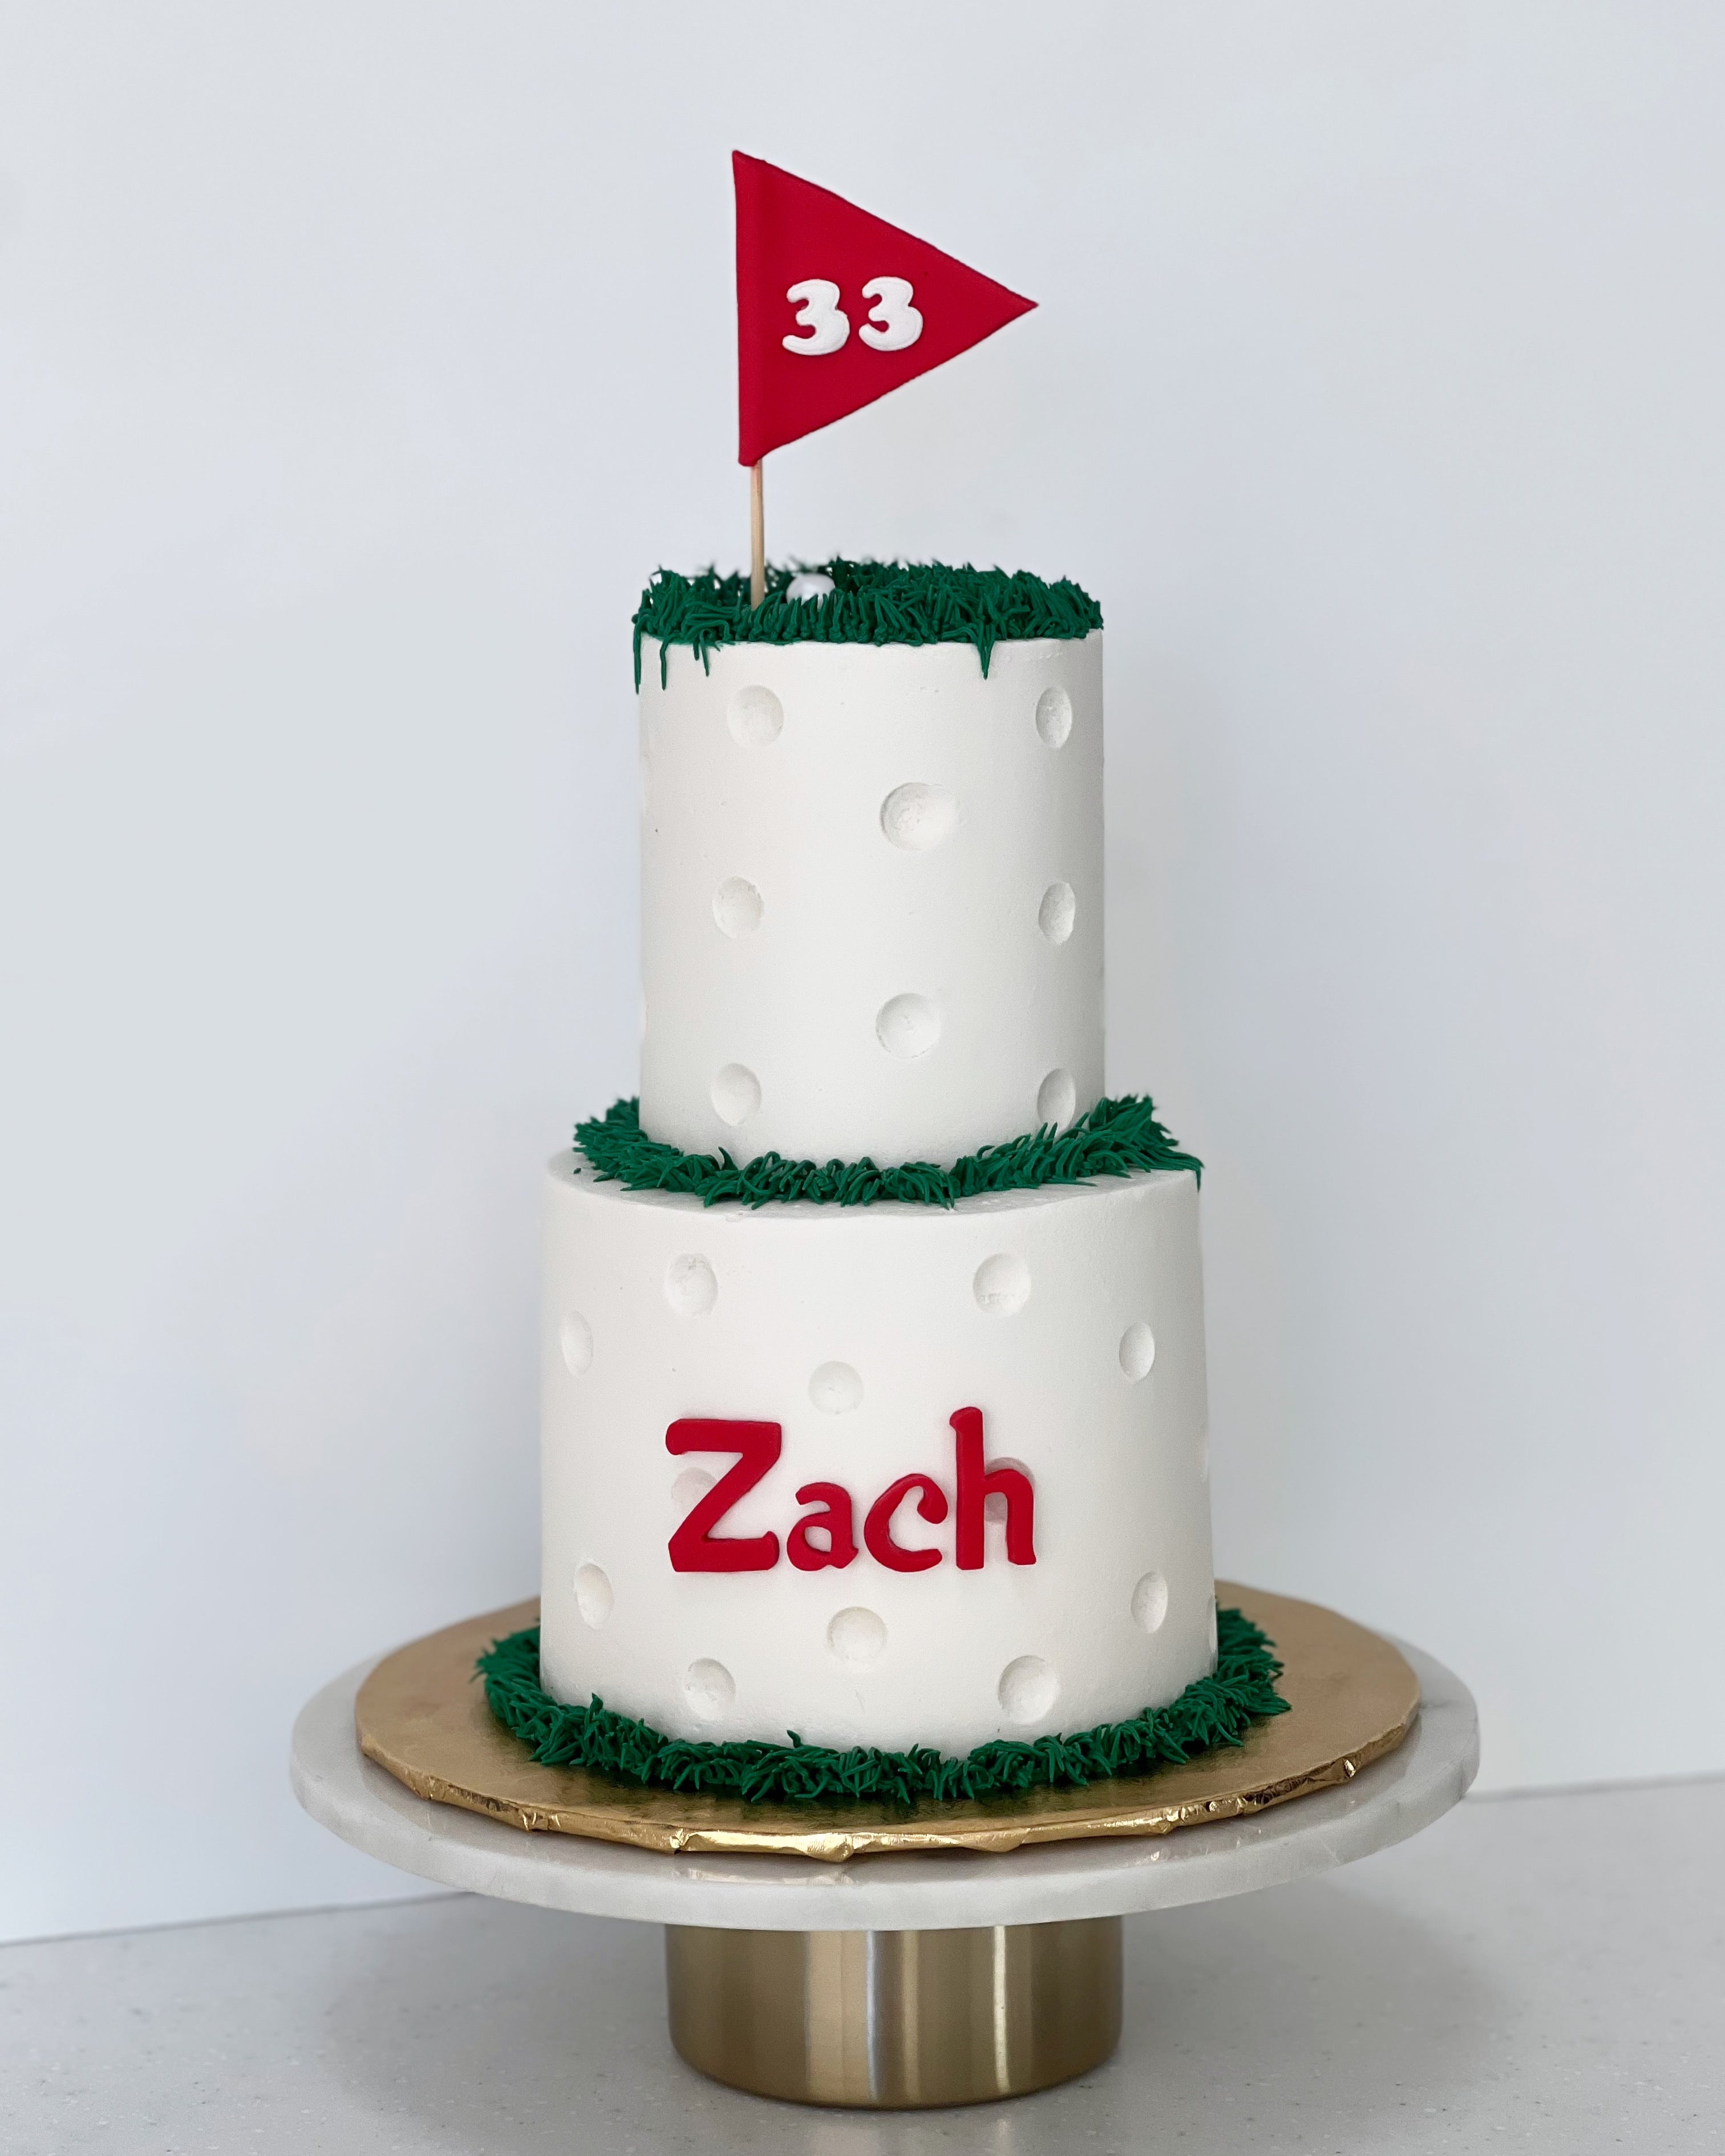 GOLF THEMED 4LB POUND CAKE SERVING 16 TO 20